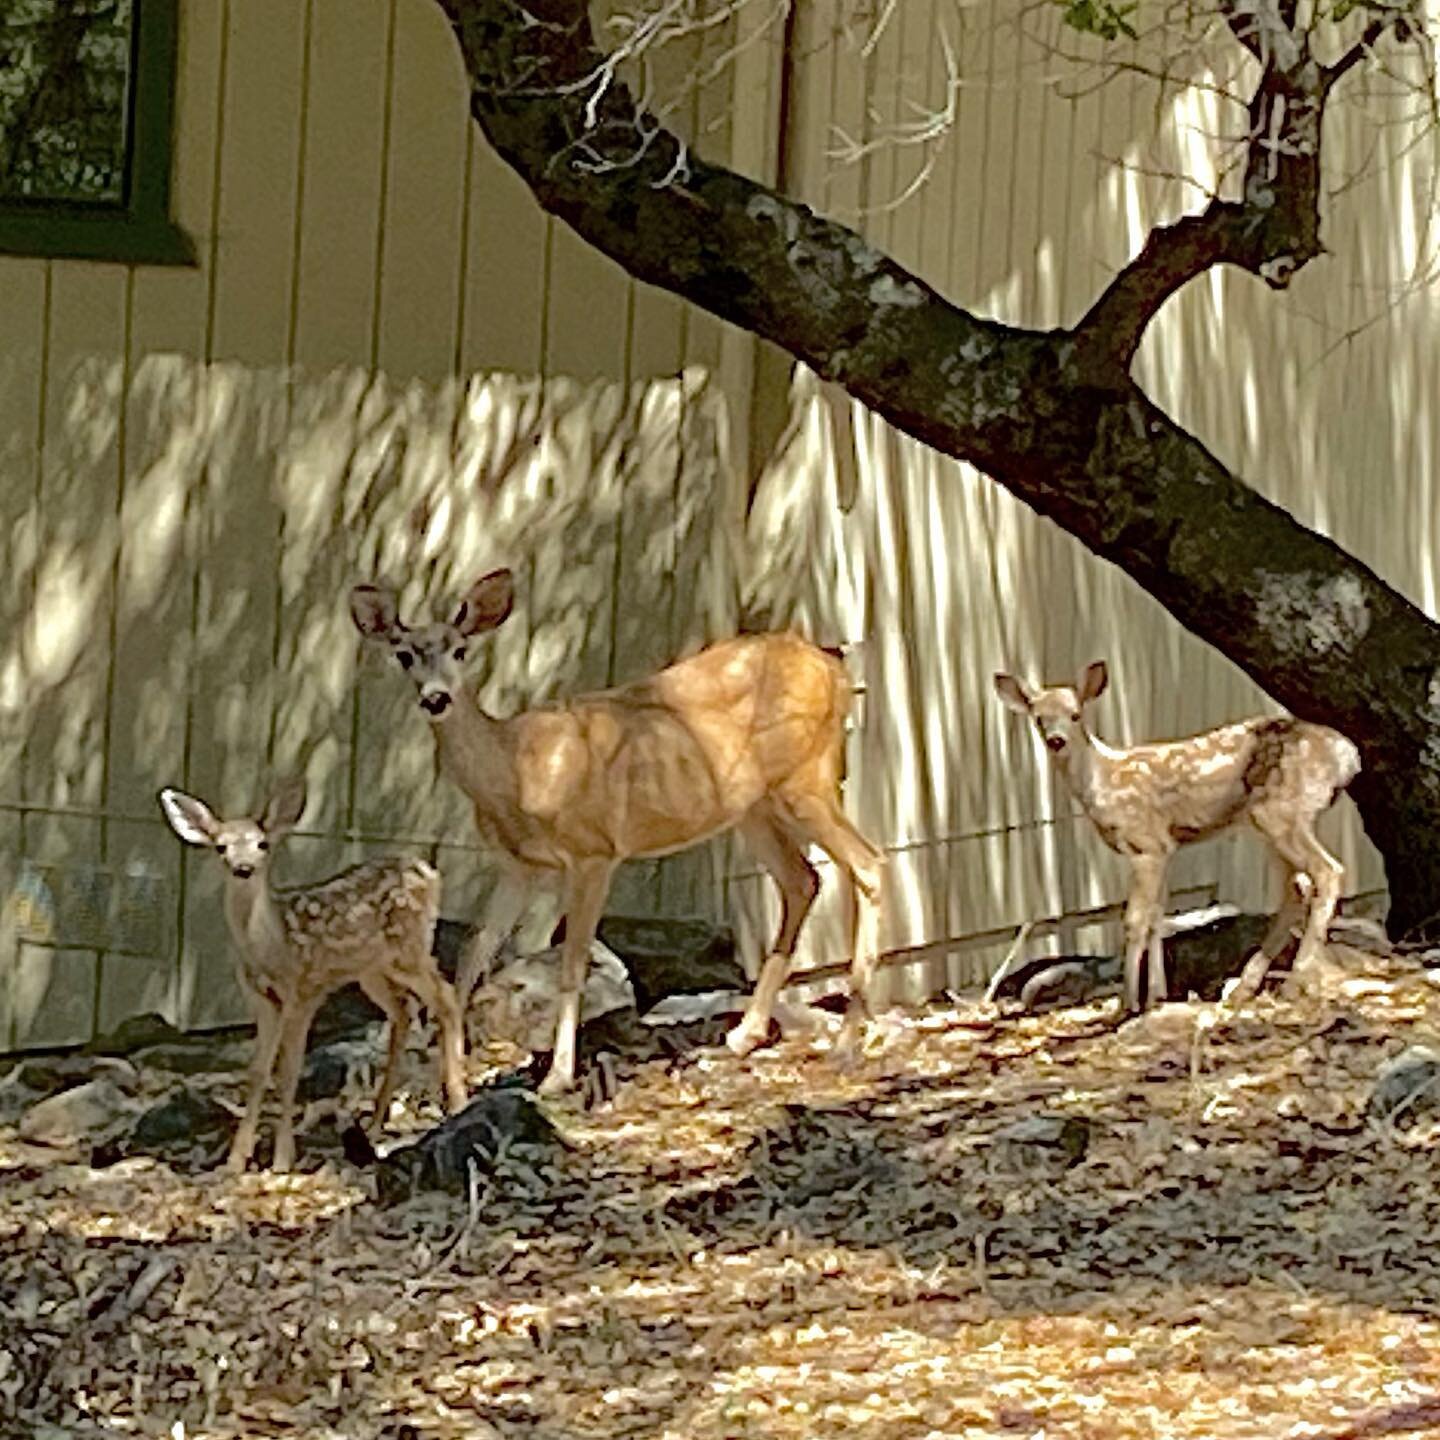 Not statues! Momma and some Bambi&rsquo;s outside @4bearschalet this morning while we had our morning cup of coffee. I couldn&rsquo;t explain it any better of how peaceful this area of #pinemountainlake is. They didn&rsquo;t seem to mind the #photoop